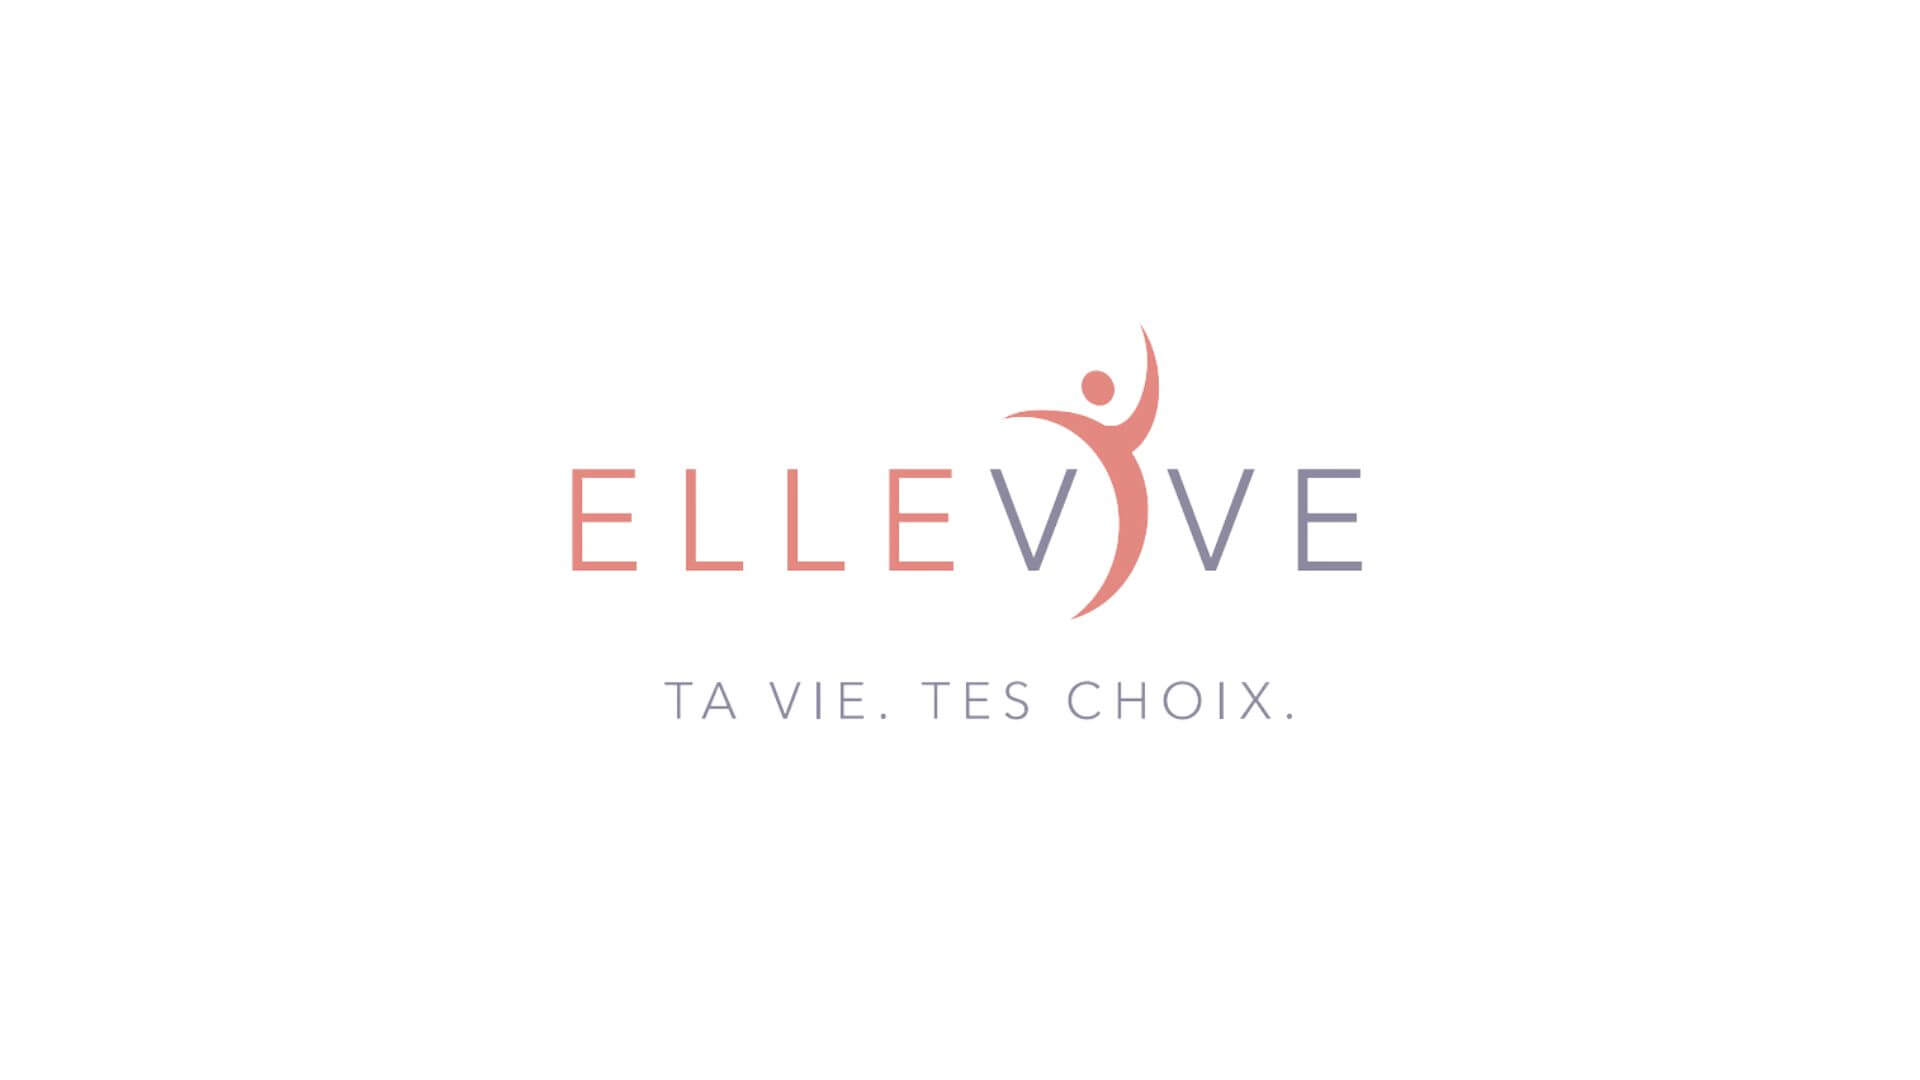 Timmins Care Ellevie brand logo with tagline 'ta vie. tes choix.', endorsed by Timmins Care. Cochrane District Social Services Administration Board